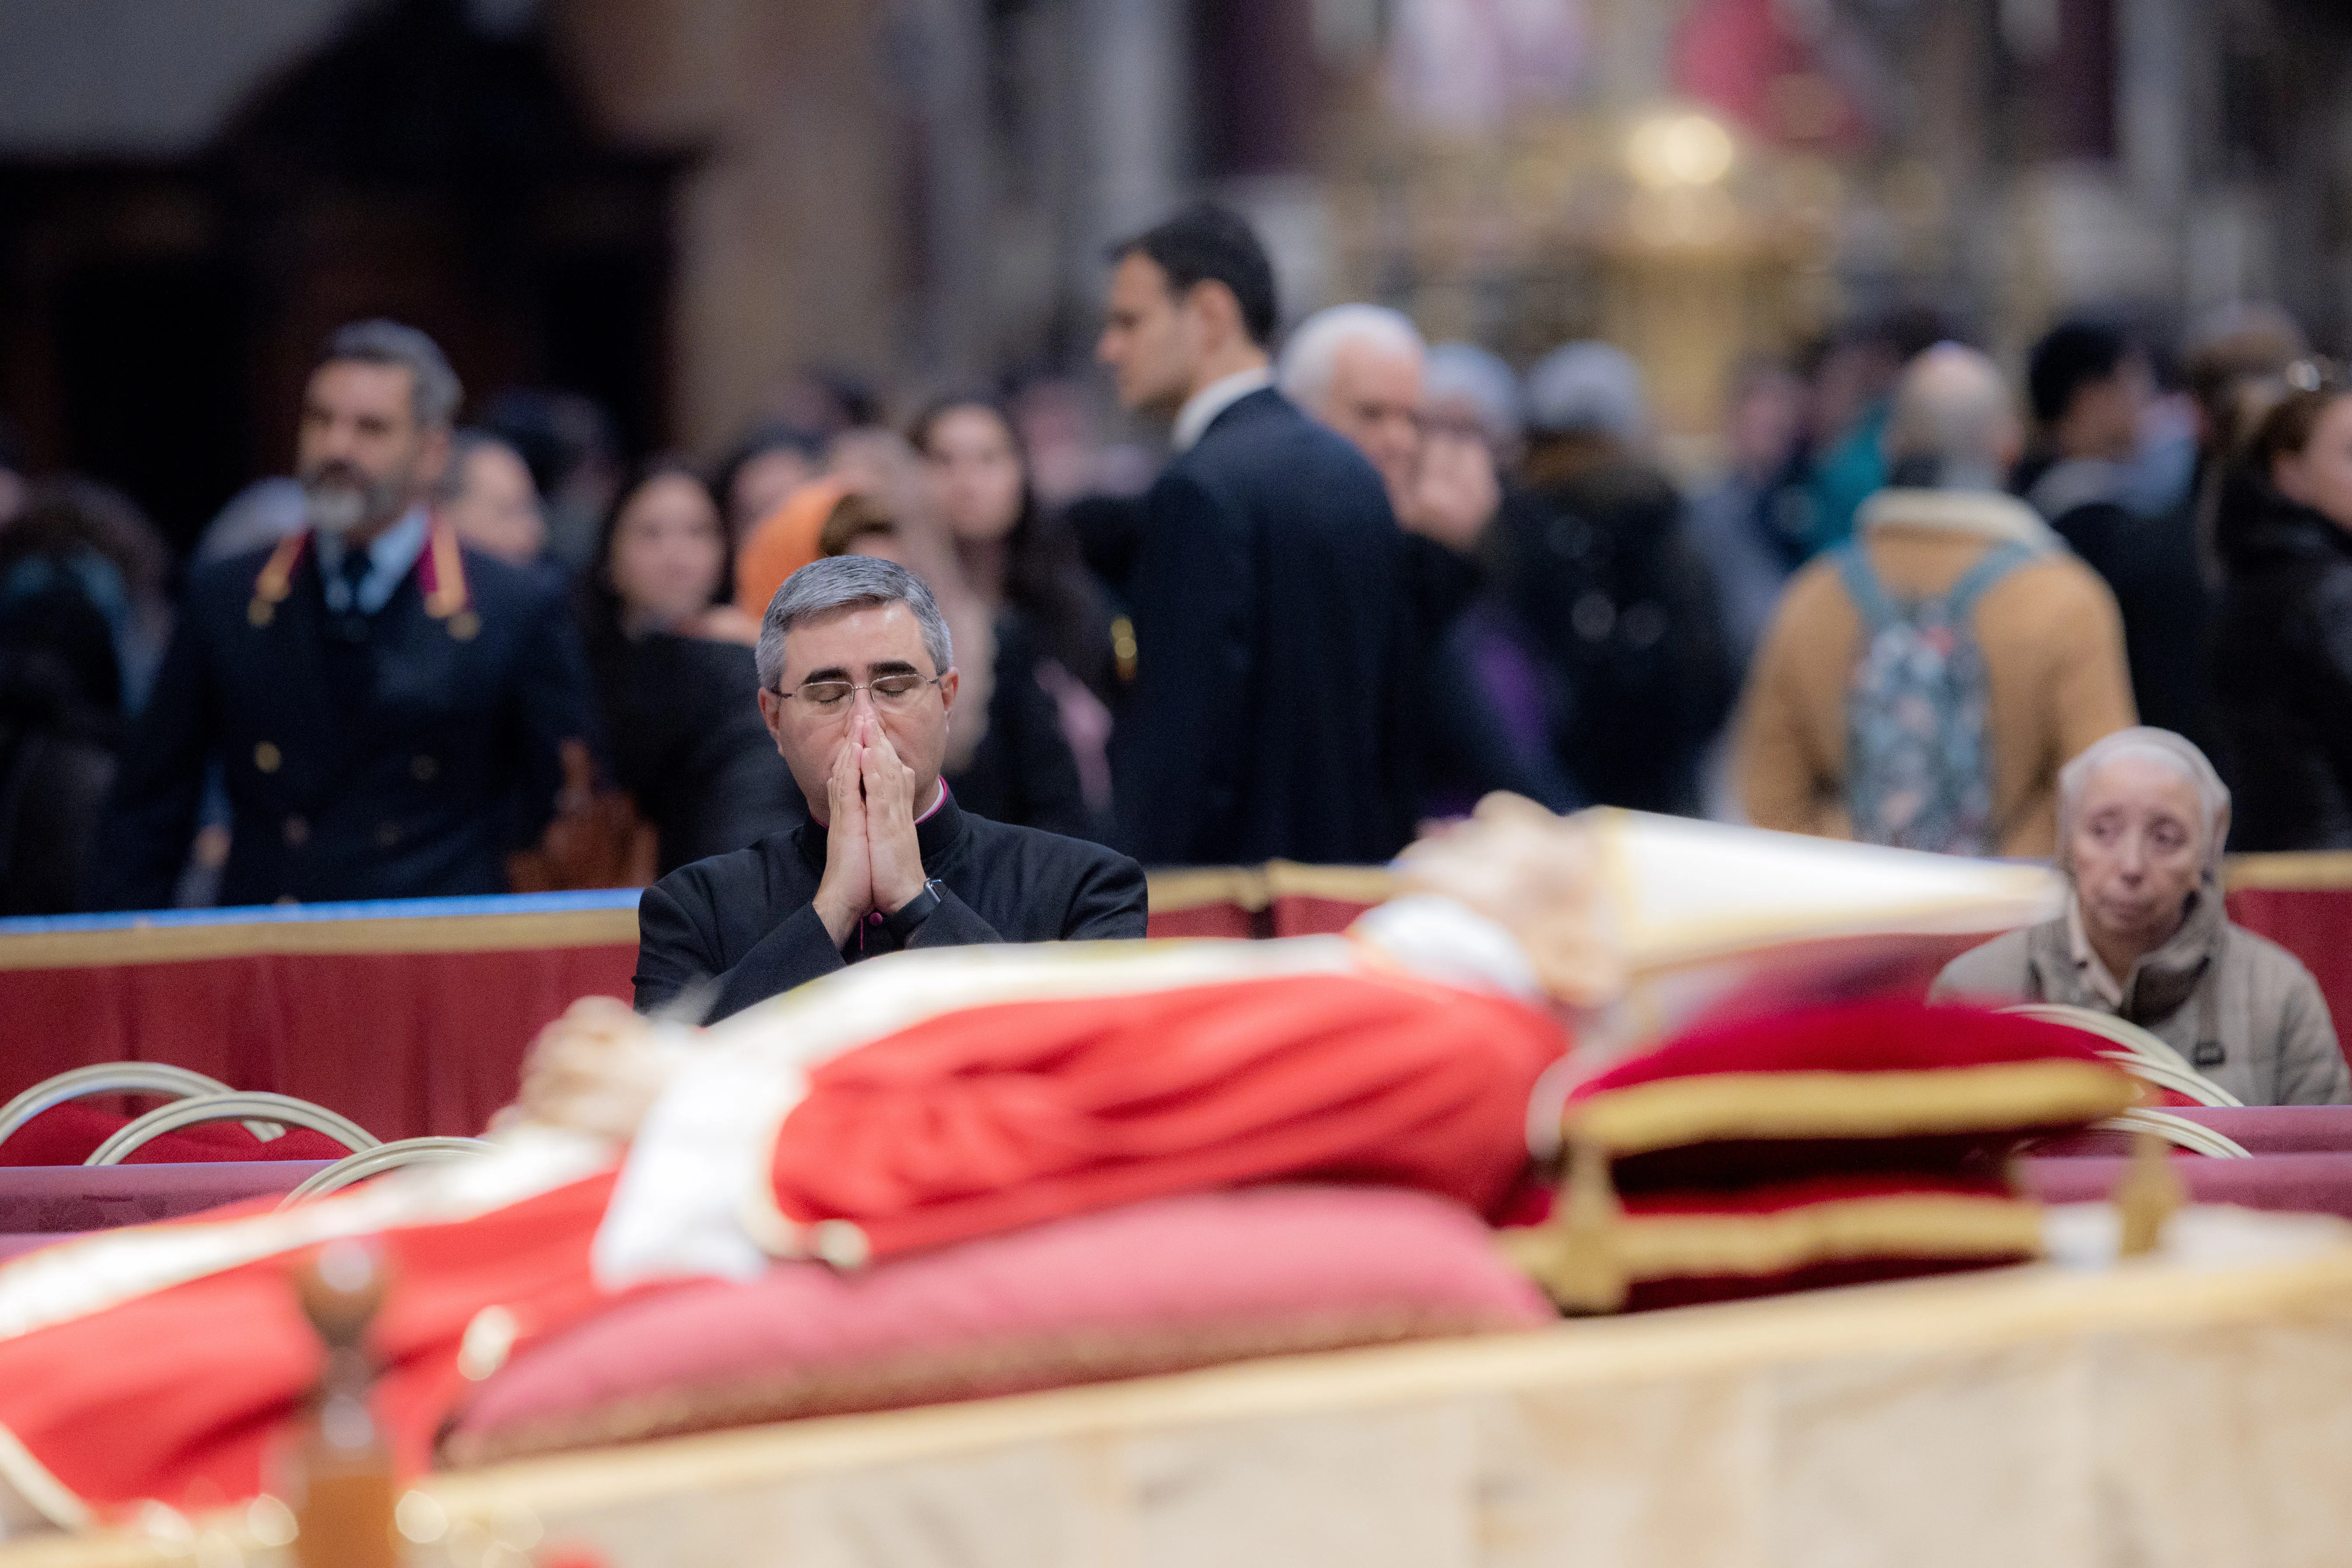 The mortal remains of Pope Emeritus Benedict XVI were moved early in the morning on Jan. 2, 2023, from his former residence in the Vatican's Mater Ecclesiae Monastery to St. Peter's Basilica, where the late pope is lying in state through Jan. 4. Thousands waited in line to pay their respects.?w=200&h=150